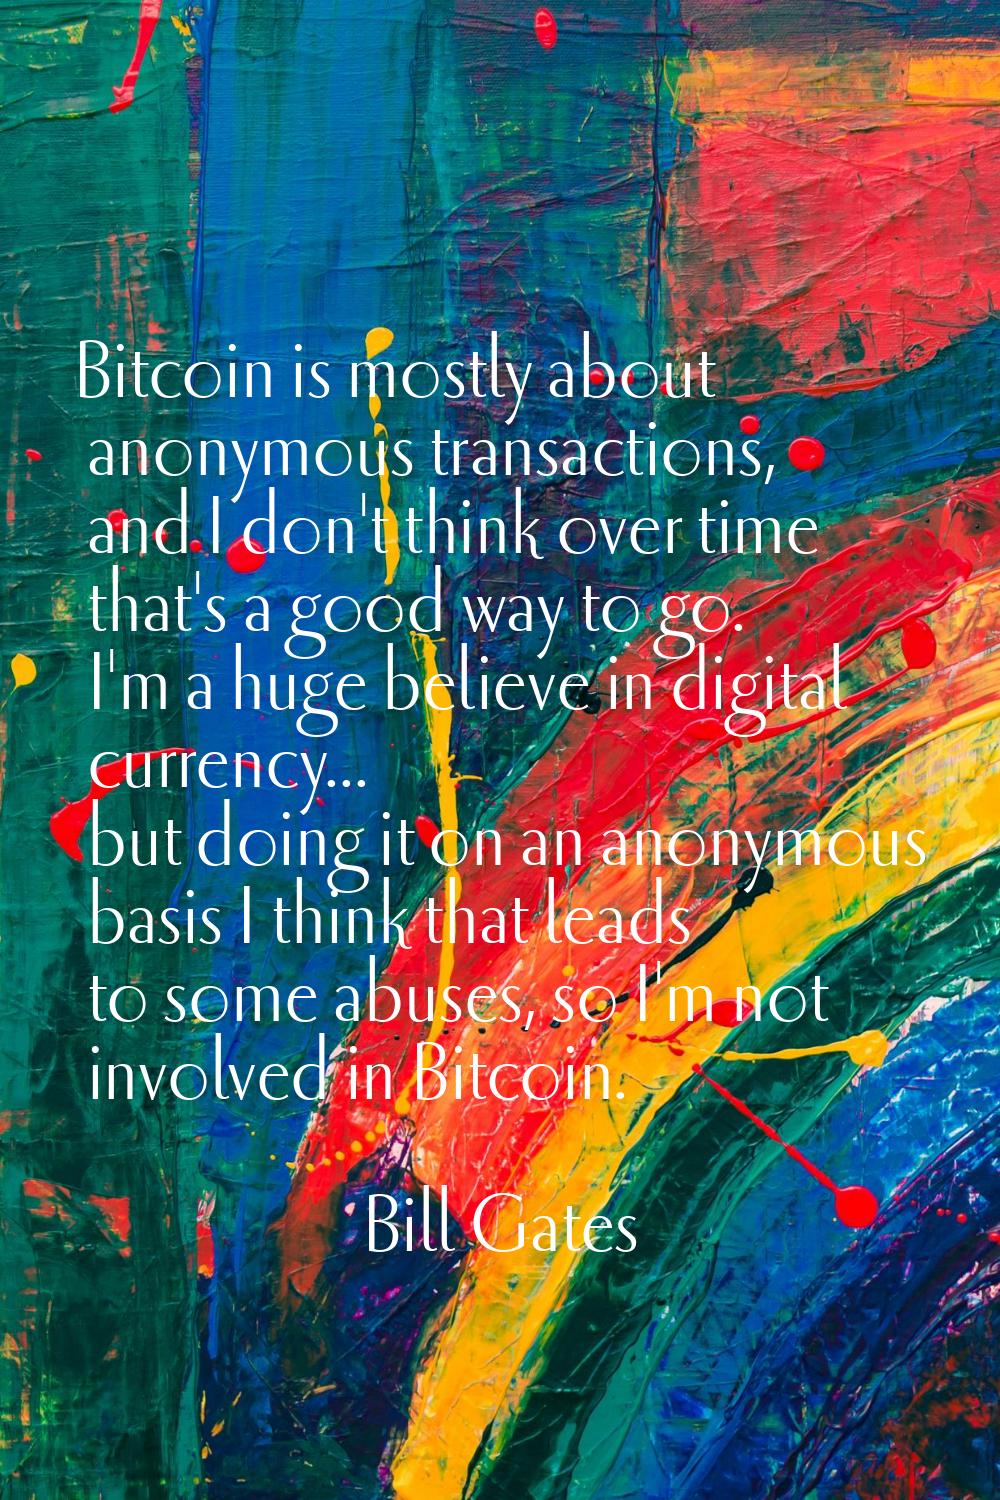 Bitcoin is mostly about anonymous transactions, and I don't think over time that's a good way to go